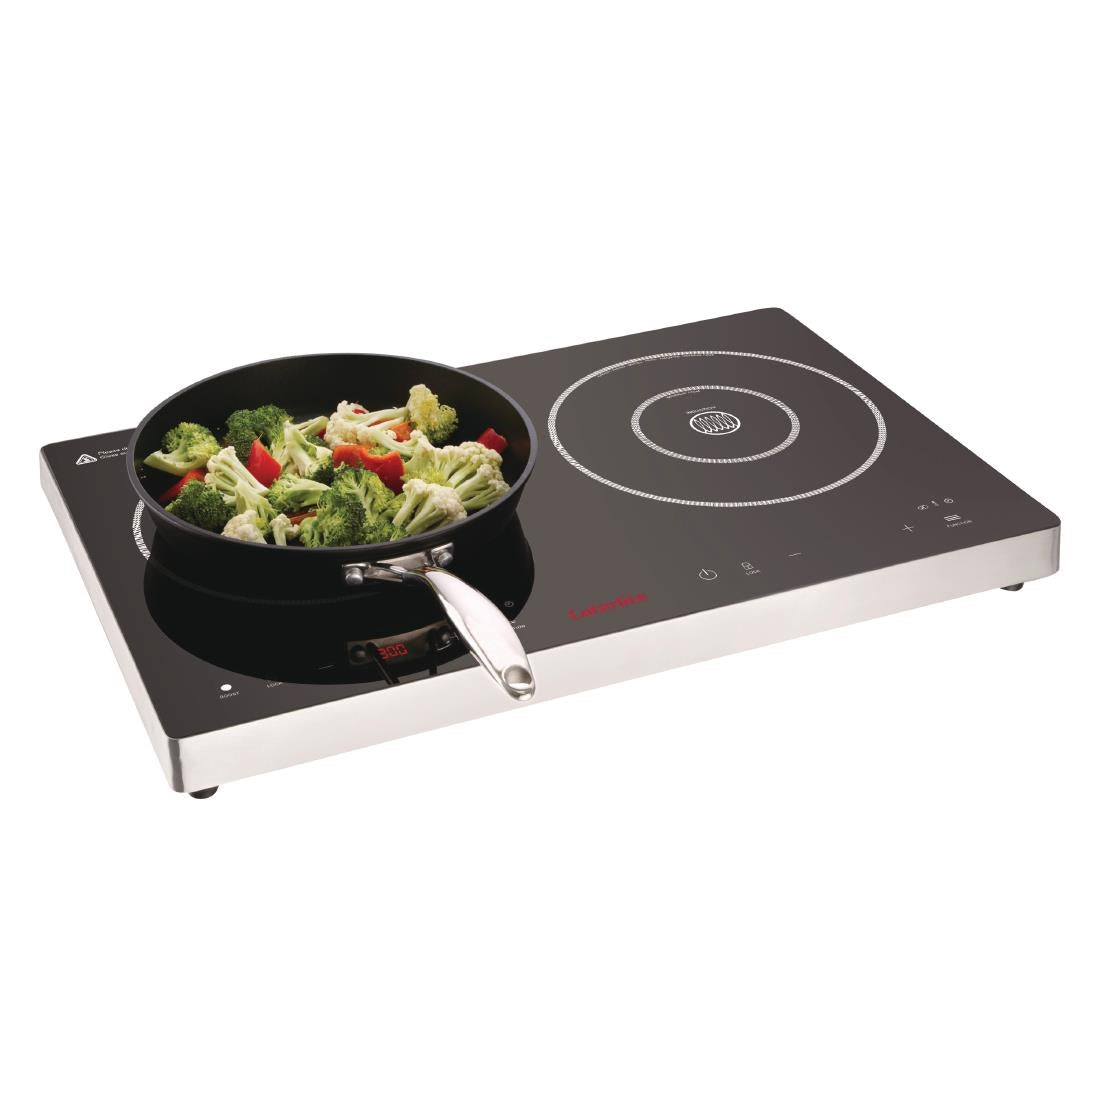 DF824 Caterlite Touch Control Double Induction Hob JD Catering Equipment Solutions Ltd